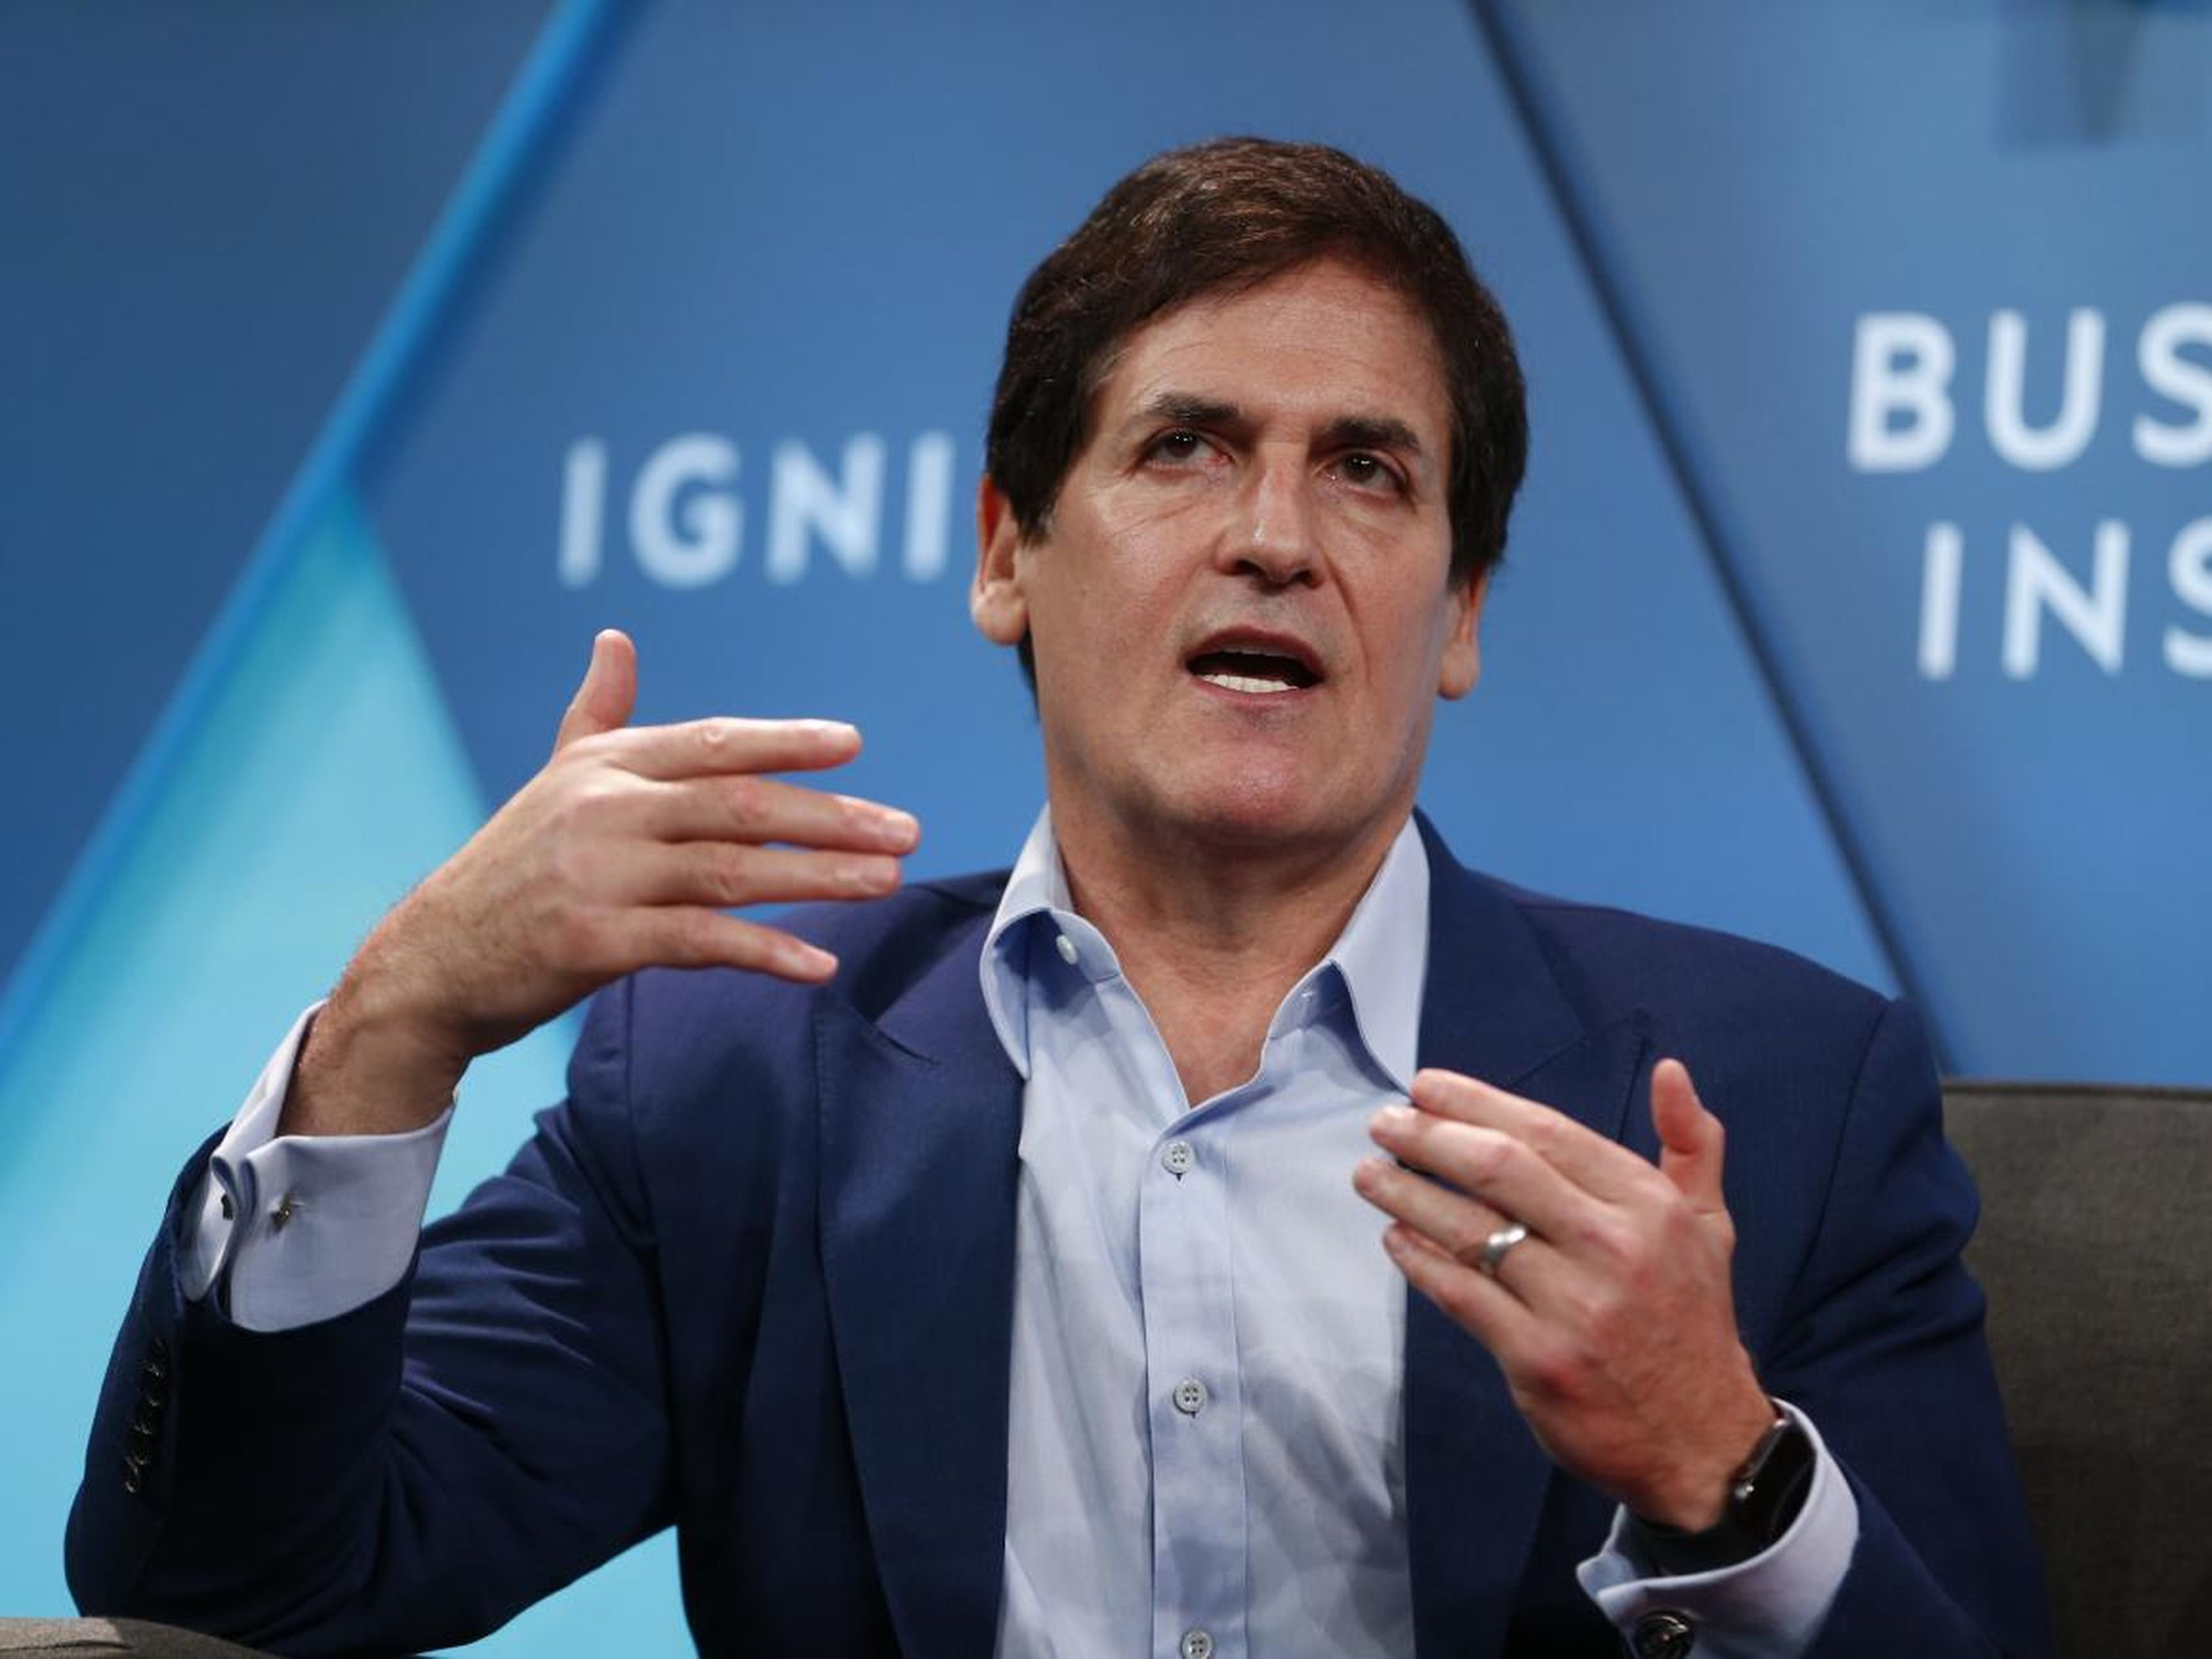 Investor Mark Cuban owns three jets. The billionaire said in a 2017 interview that owning a private plane was his "all-time goal," because "the asset I value the most is time, and that bought me time."